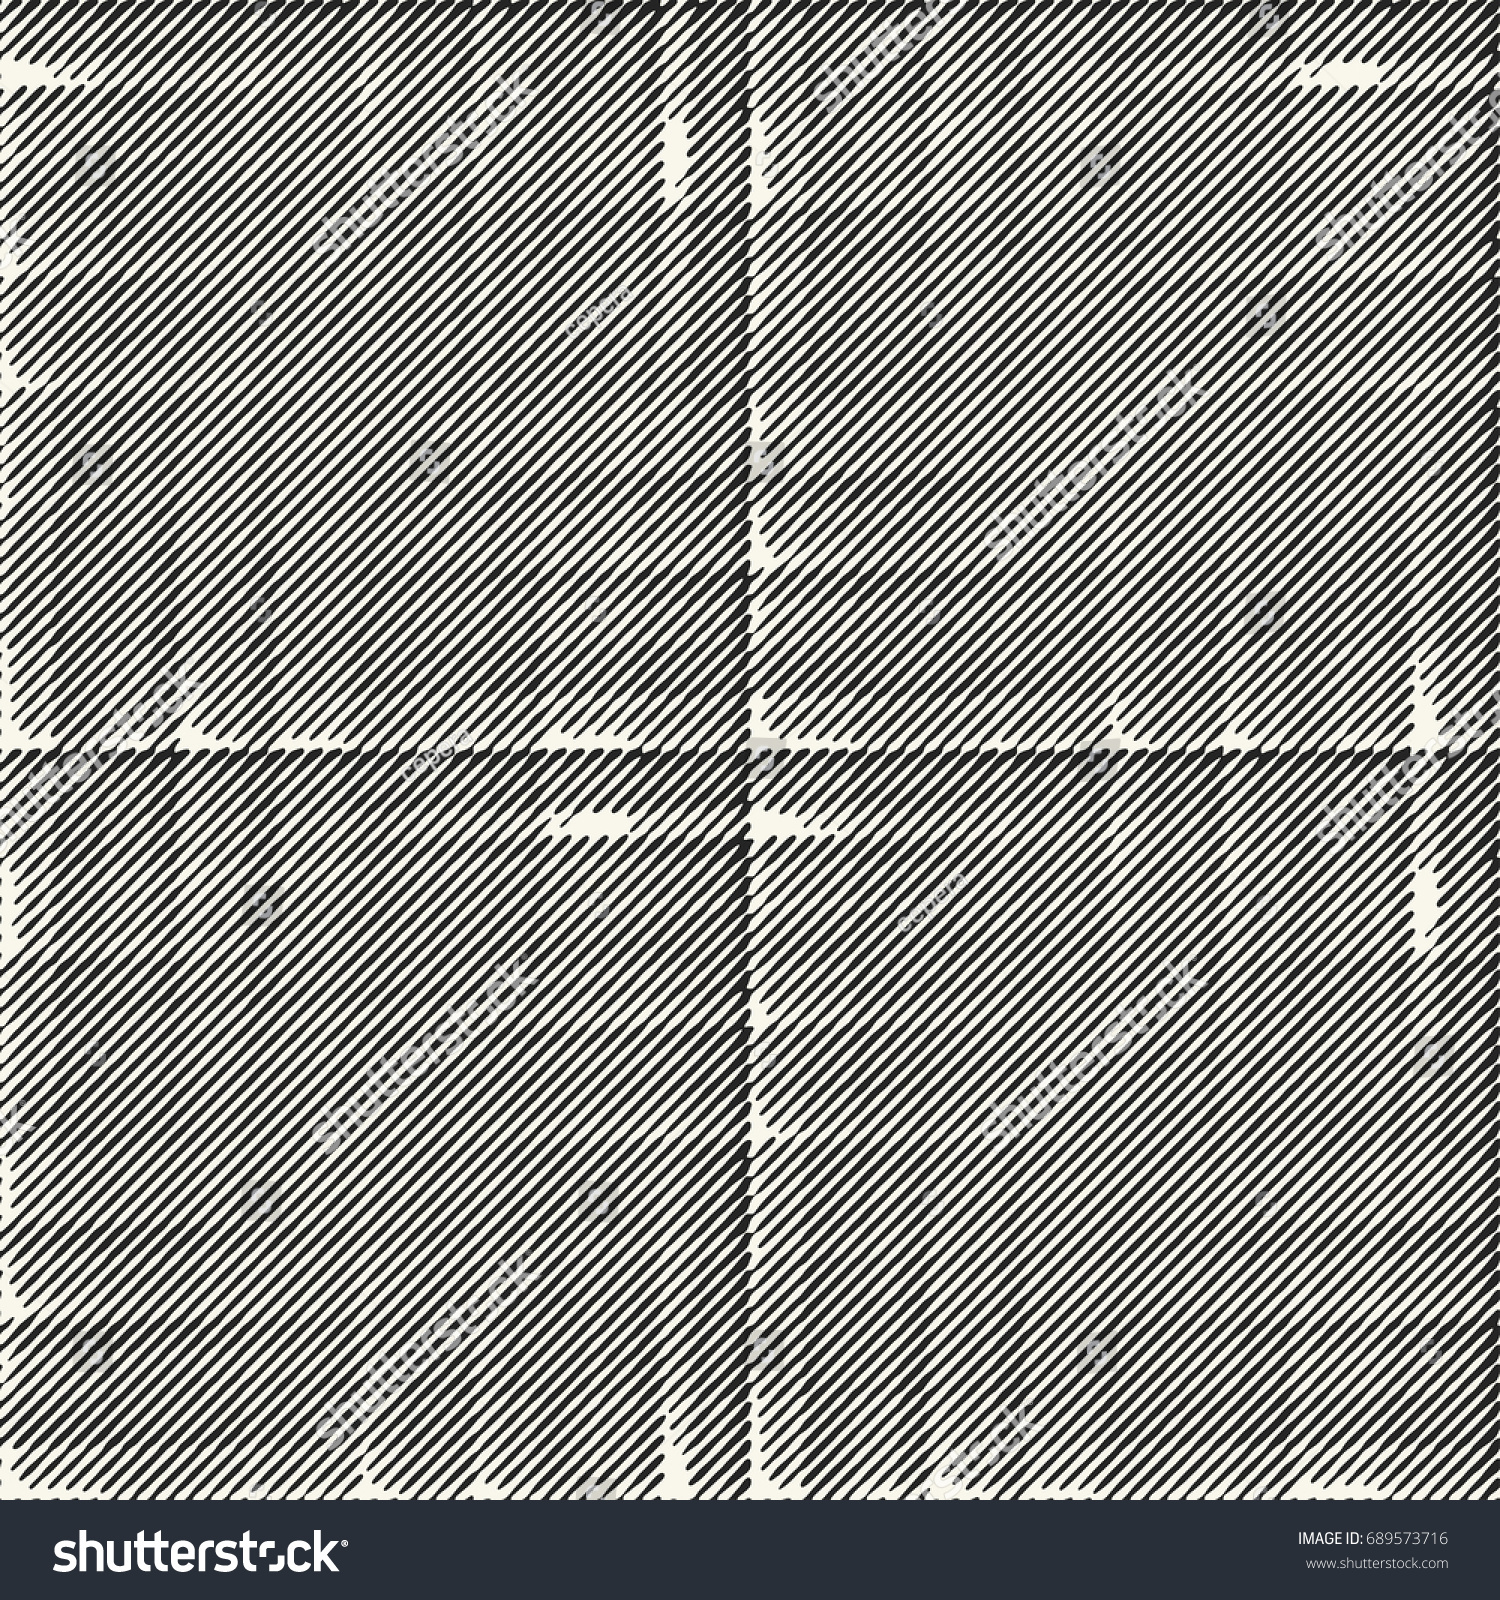 Abstract Brushed Distressed Windowpanechecked Background Seamless ...